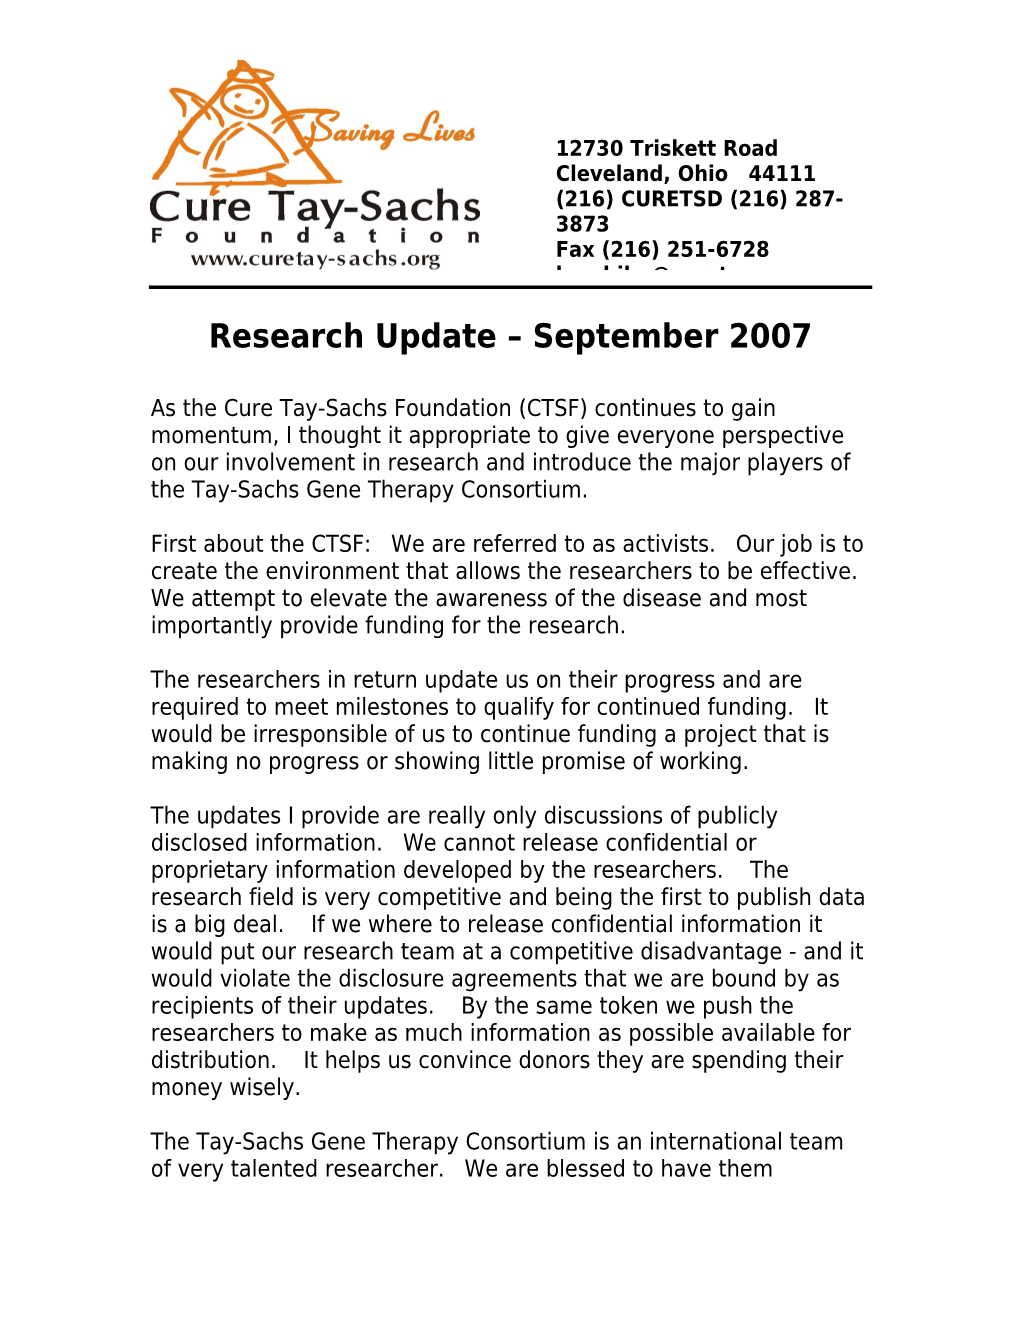 Research Update September 2007